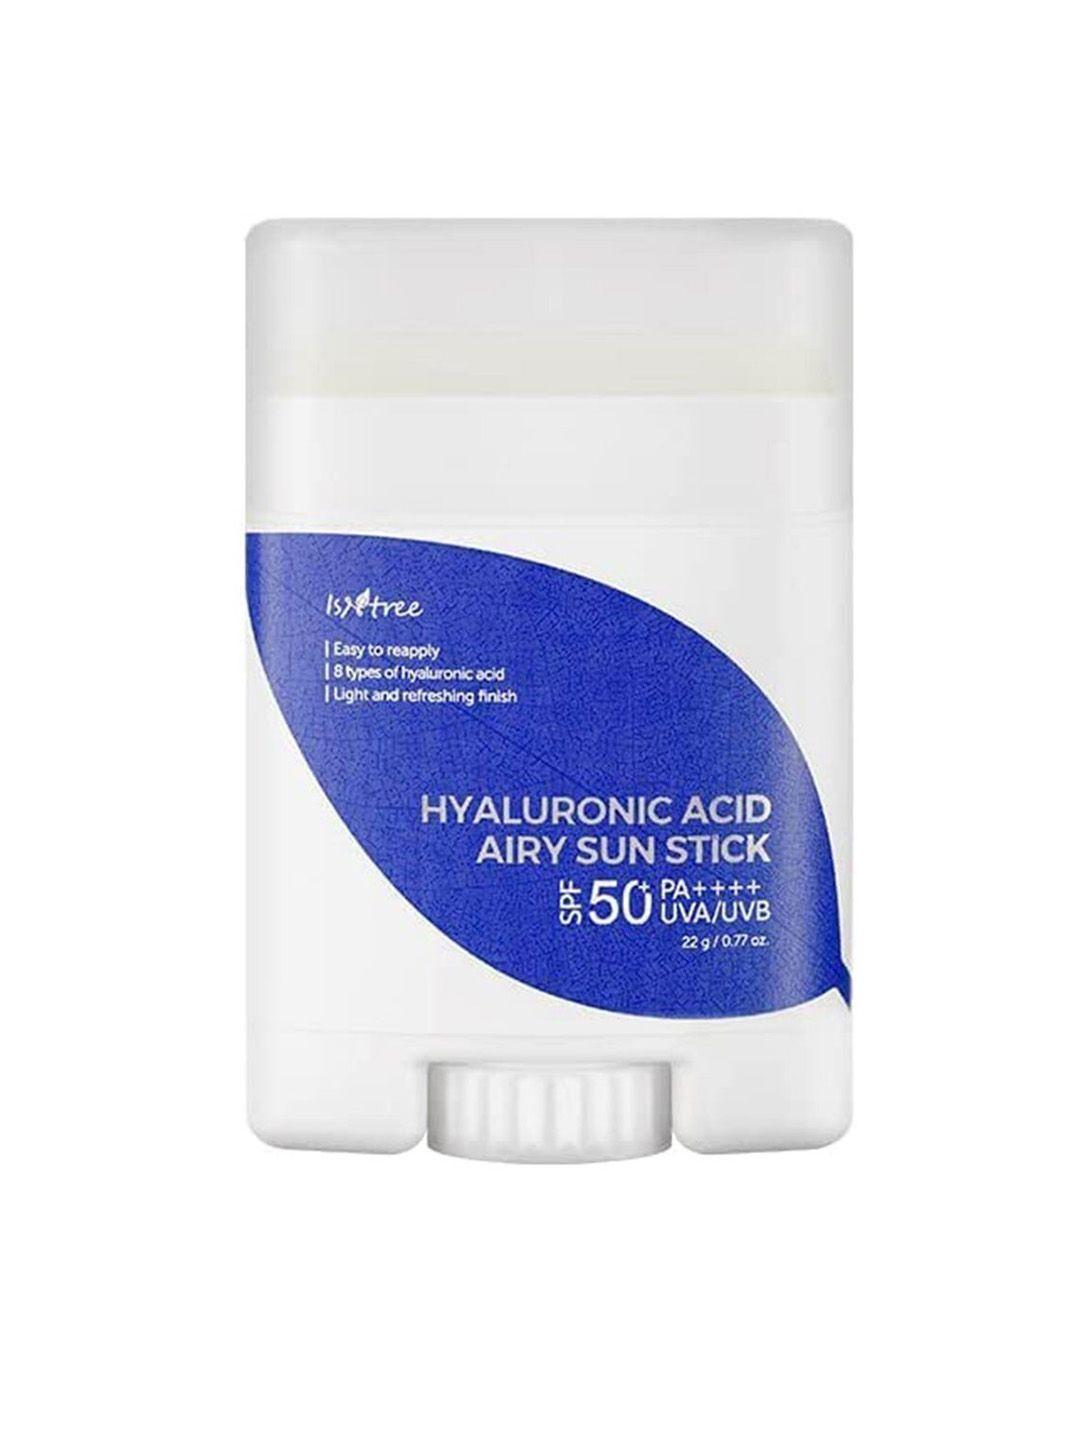 ISNTREE Hyaluronic Acid Airy Sun Stick SPF 50+ - 22g